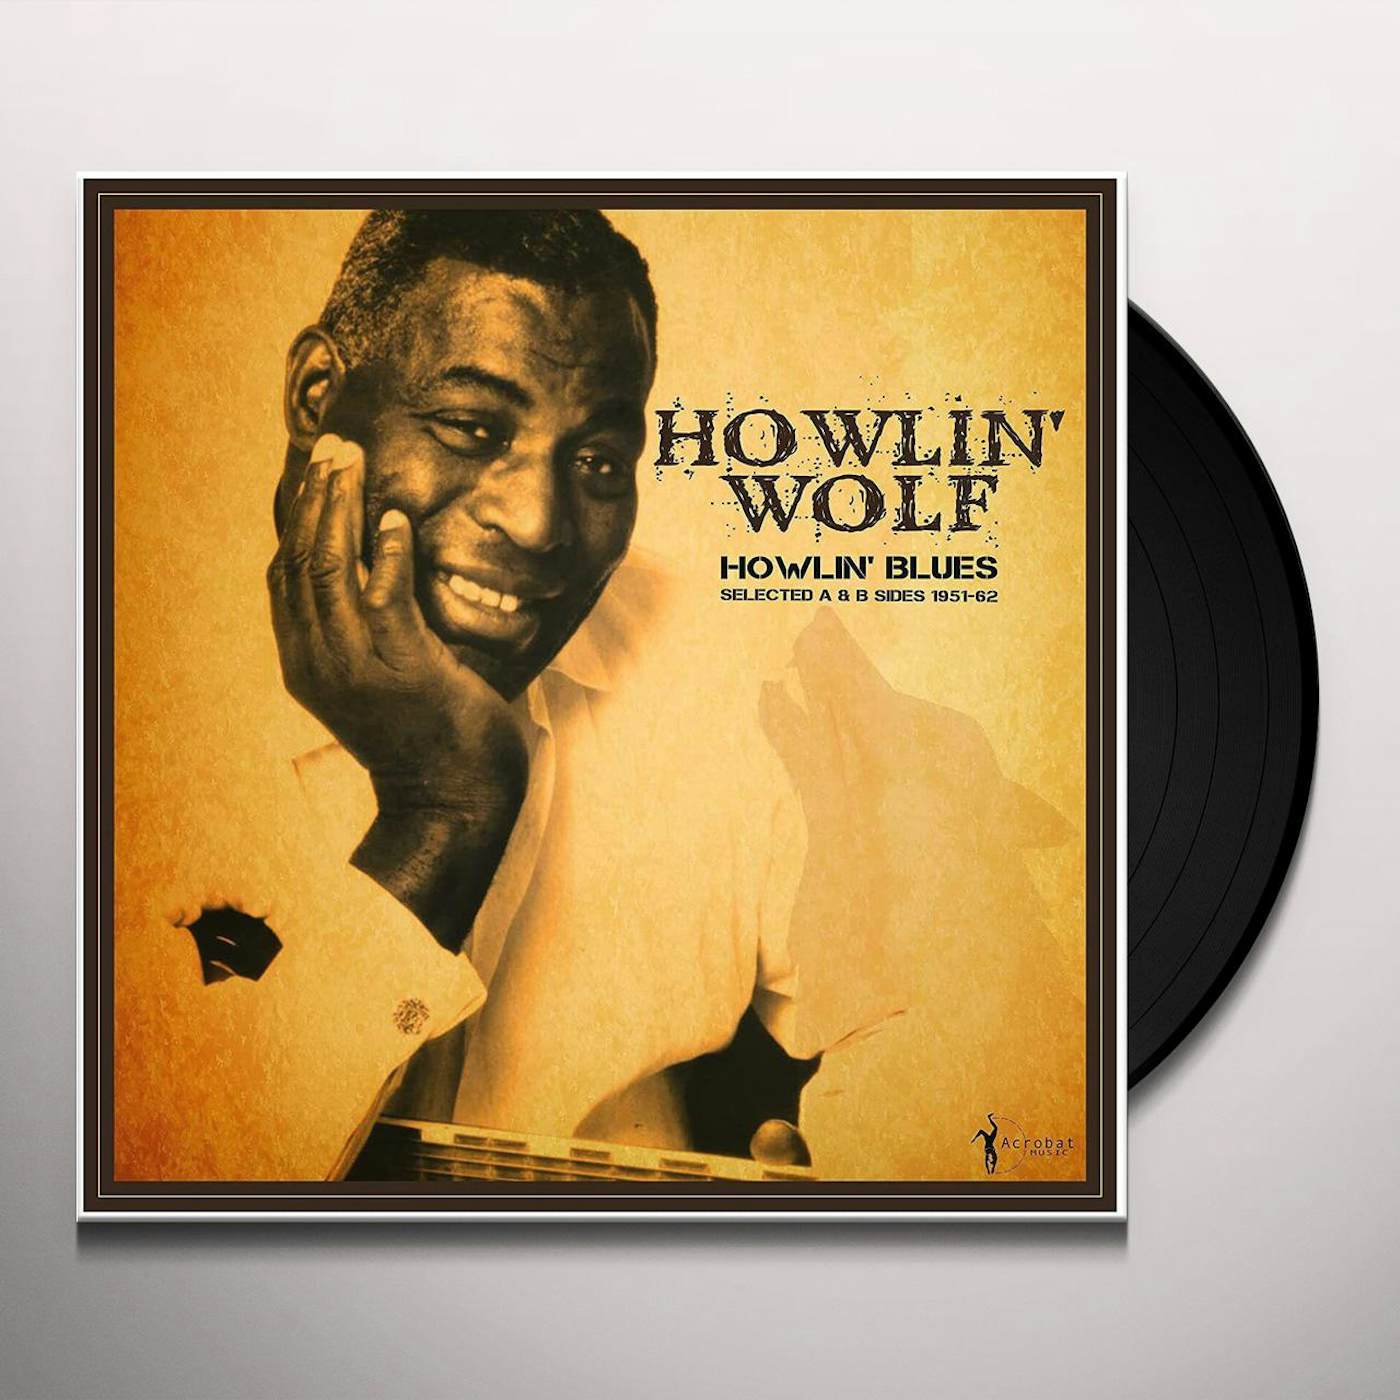 Howlin' Wolf Howlin' Blues Selected A & B Sides 1951-1962 Vinyl Record